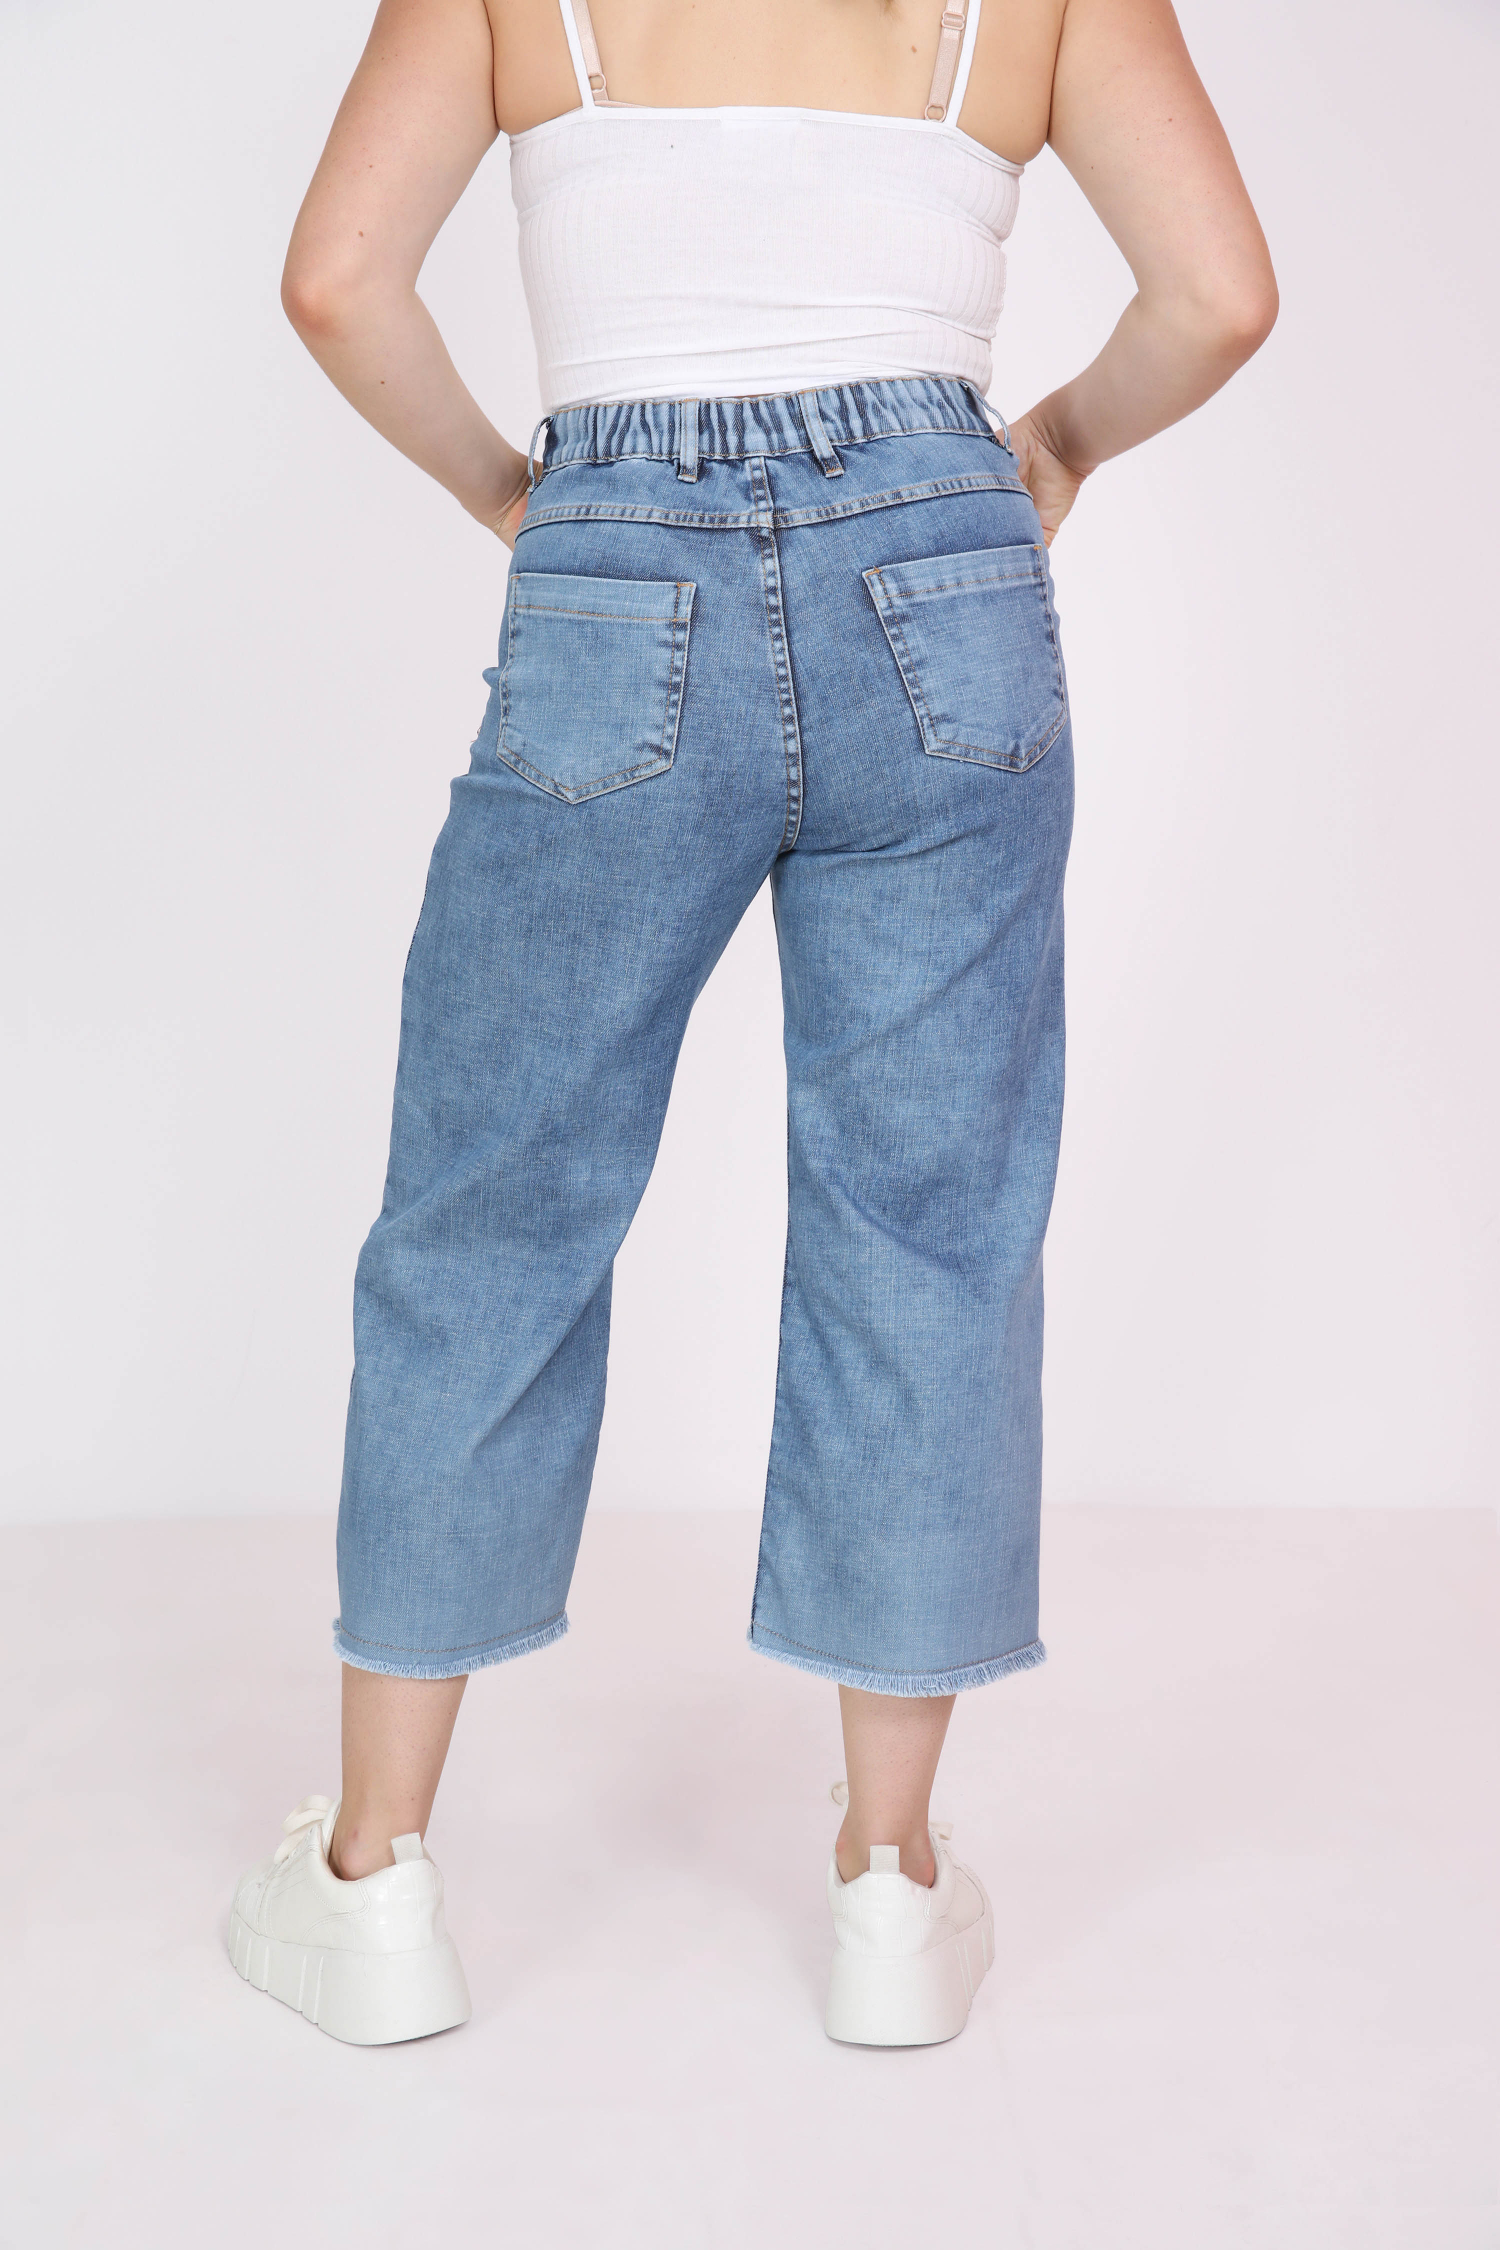 7/8 stone jeans with hippie chic fringes